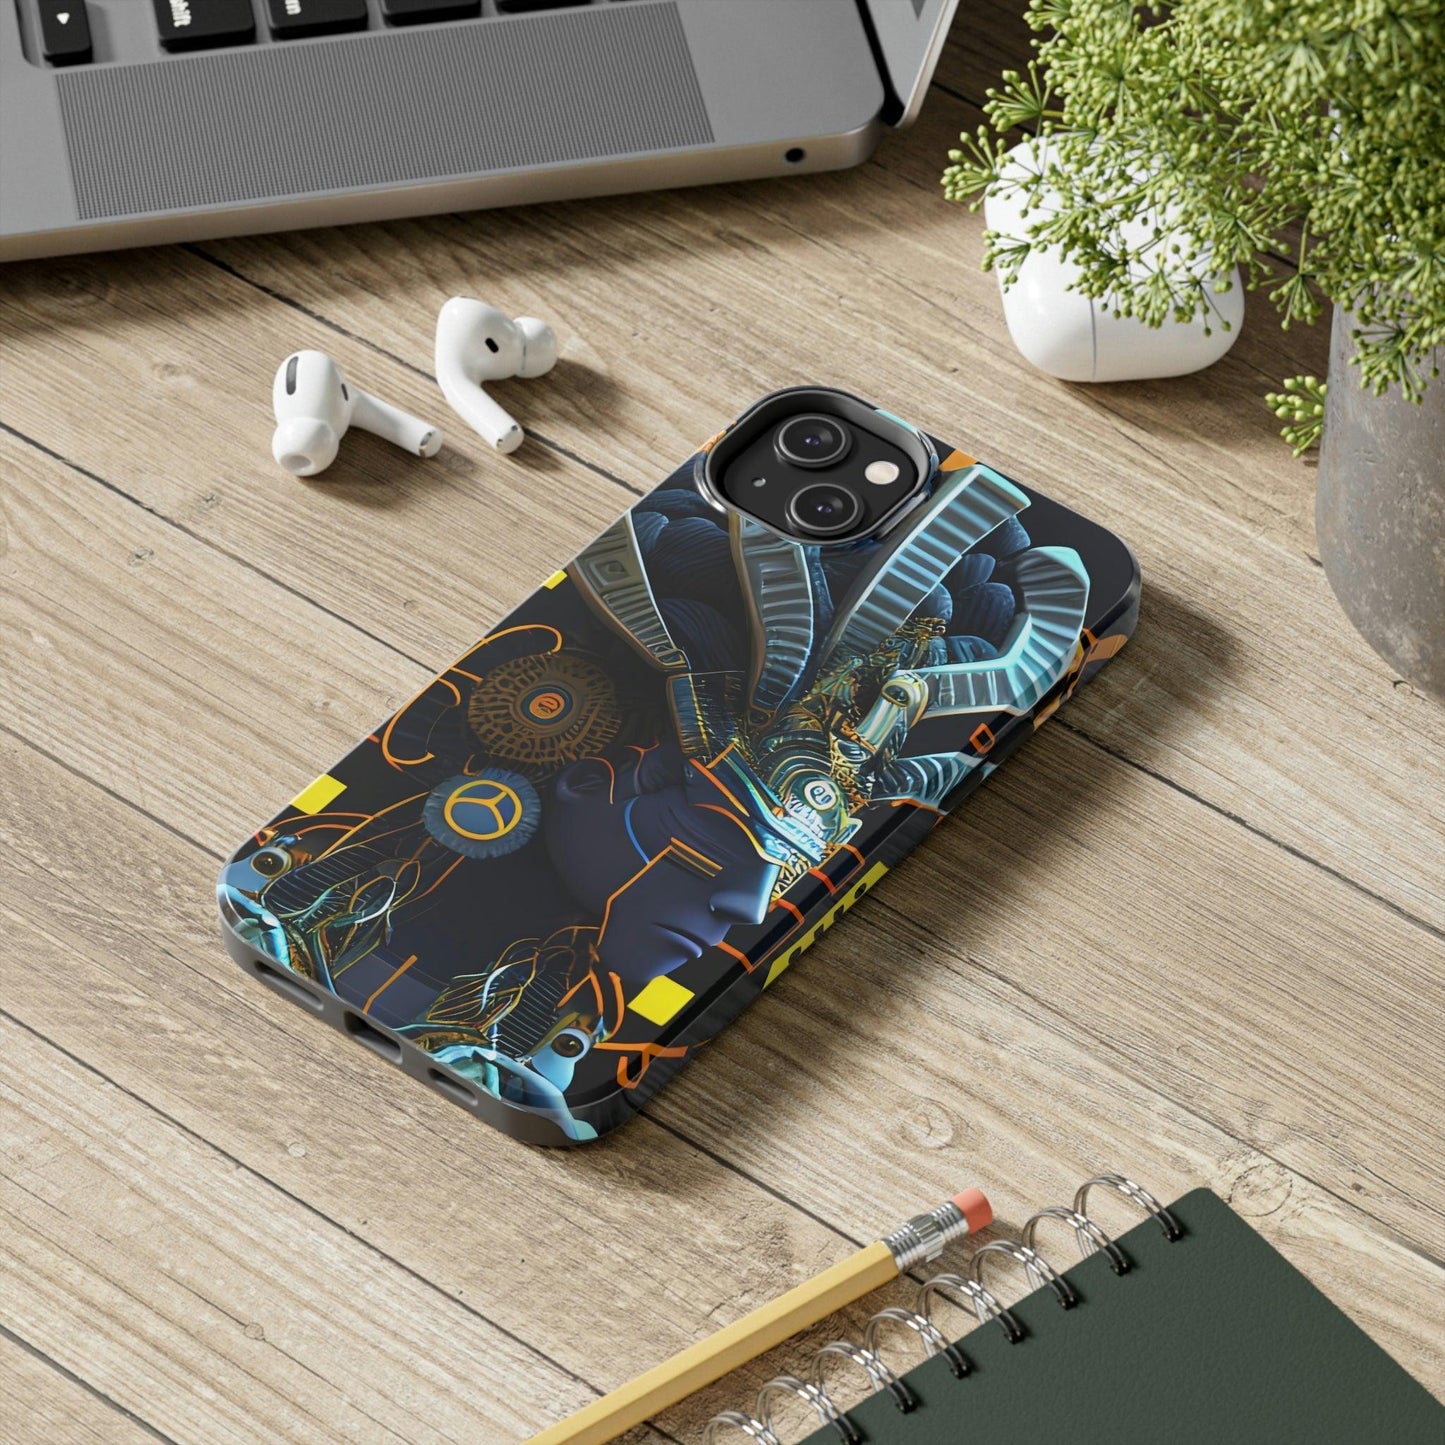 Mayan / Aztec Alien Robot Tribal Warrior Custom Artwork iPhone Case - Uniquely Designed and Inspired by Ancient Civilizations - Alchemystics.org